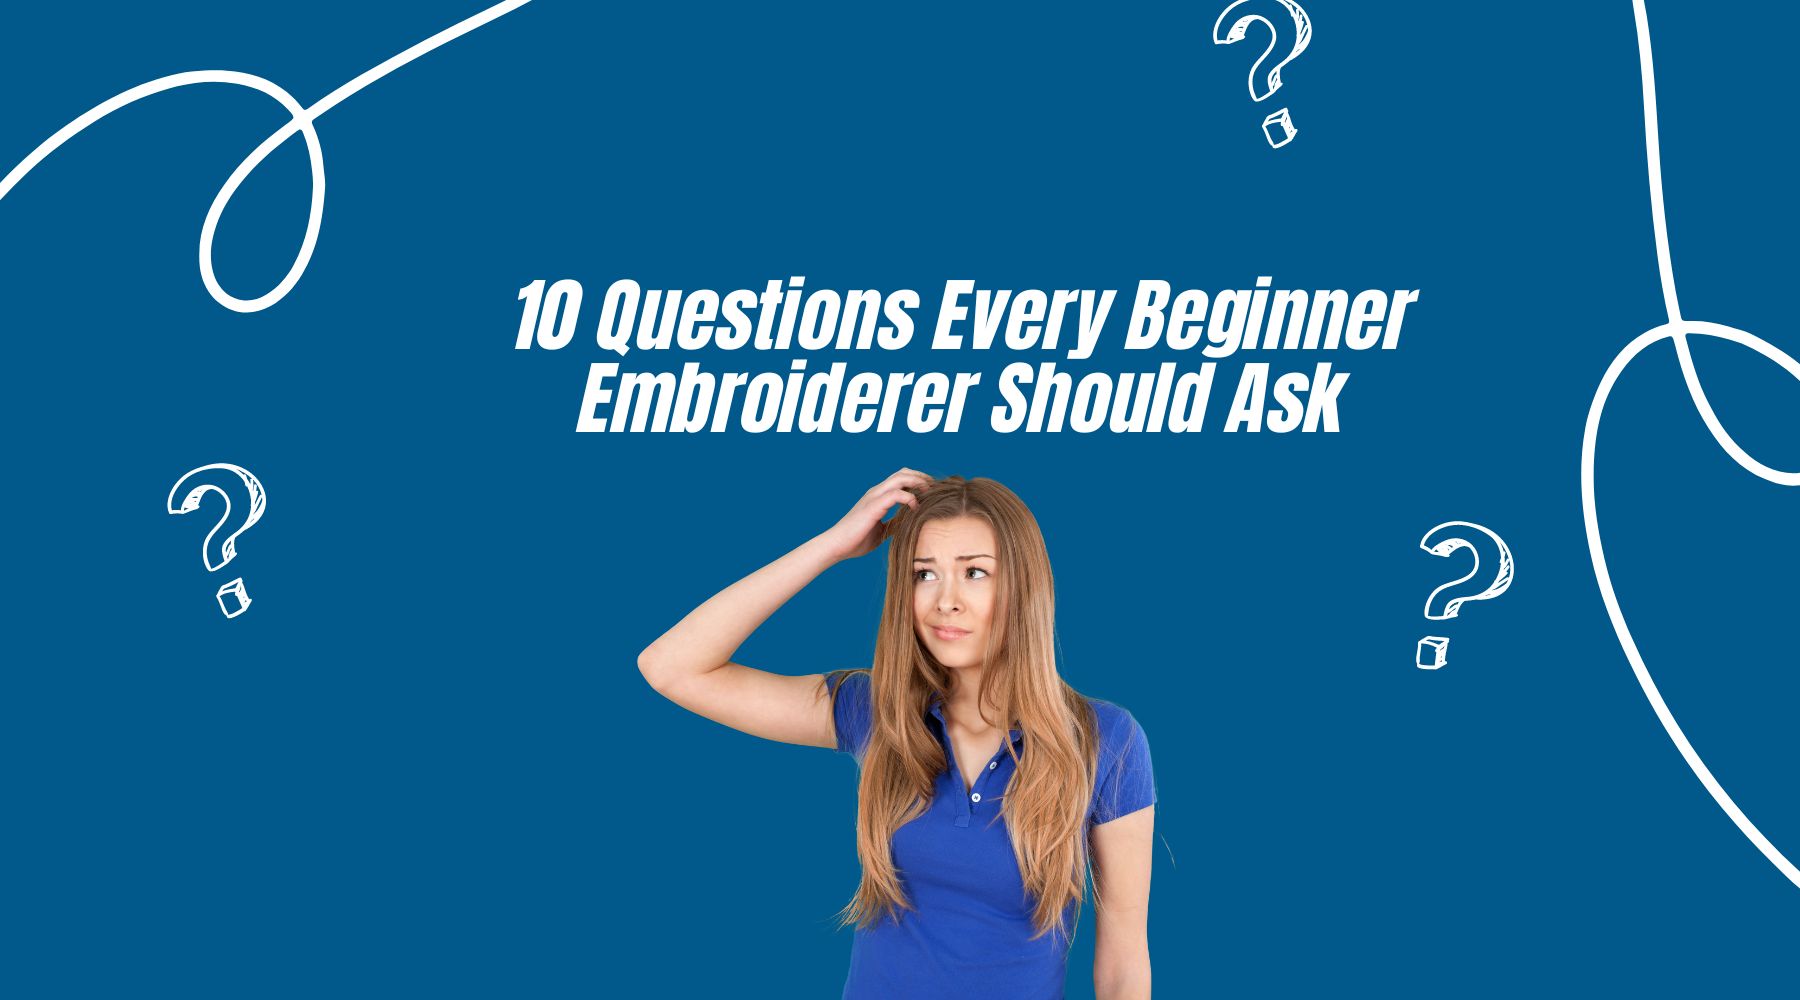 10 Questions Every Beginner Embroiderer Should Ask